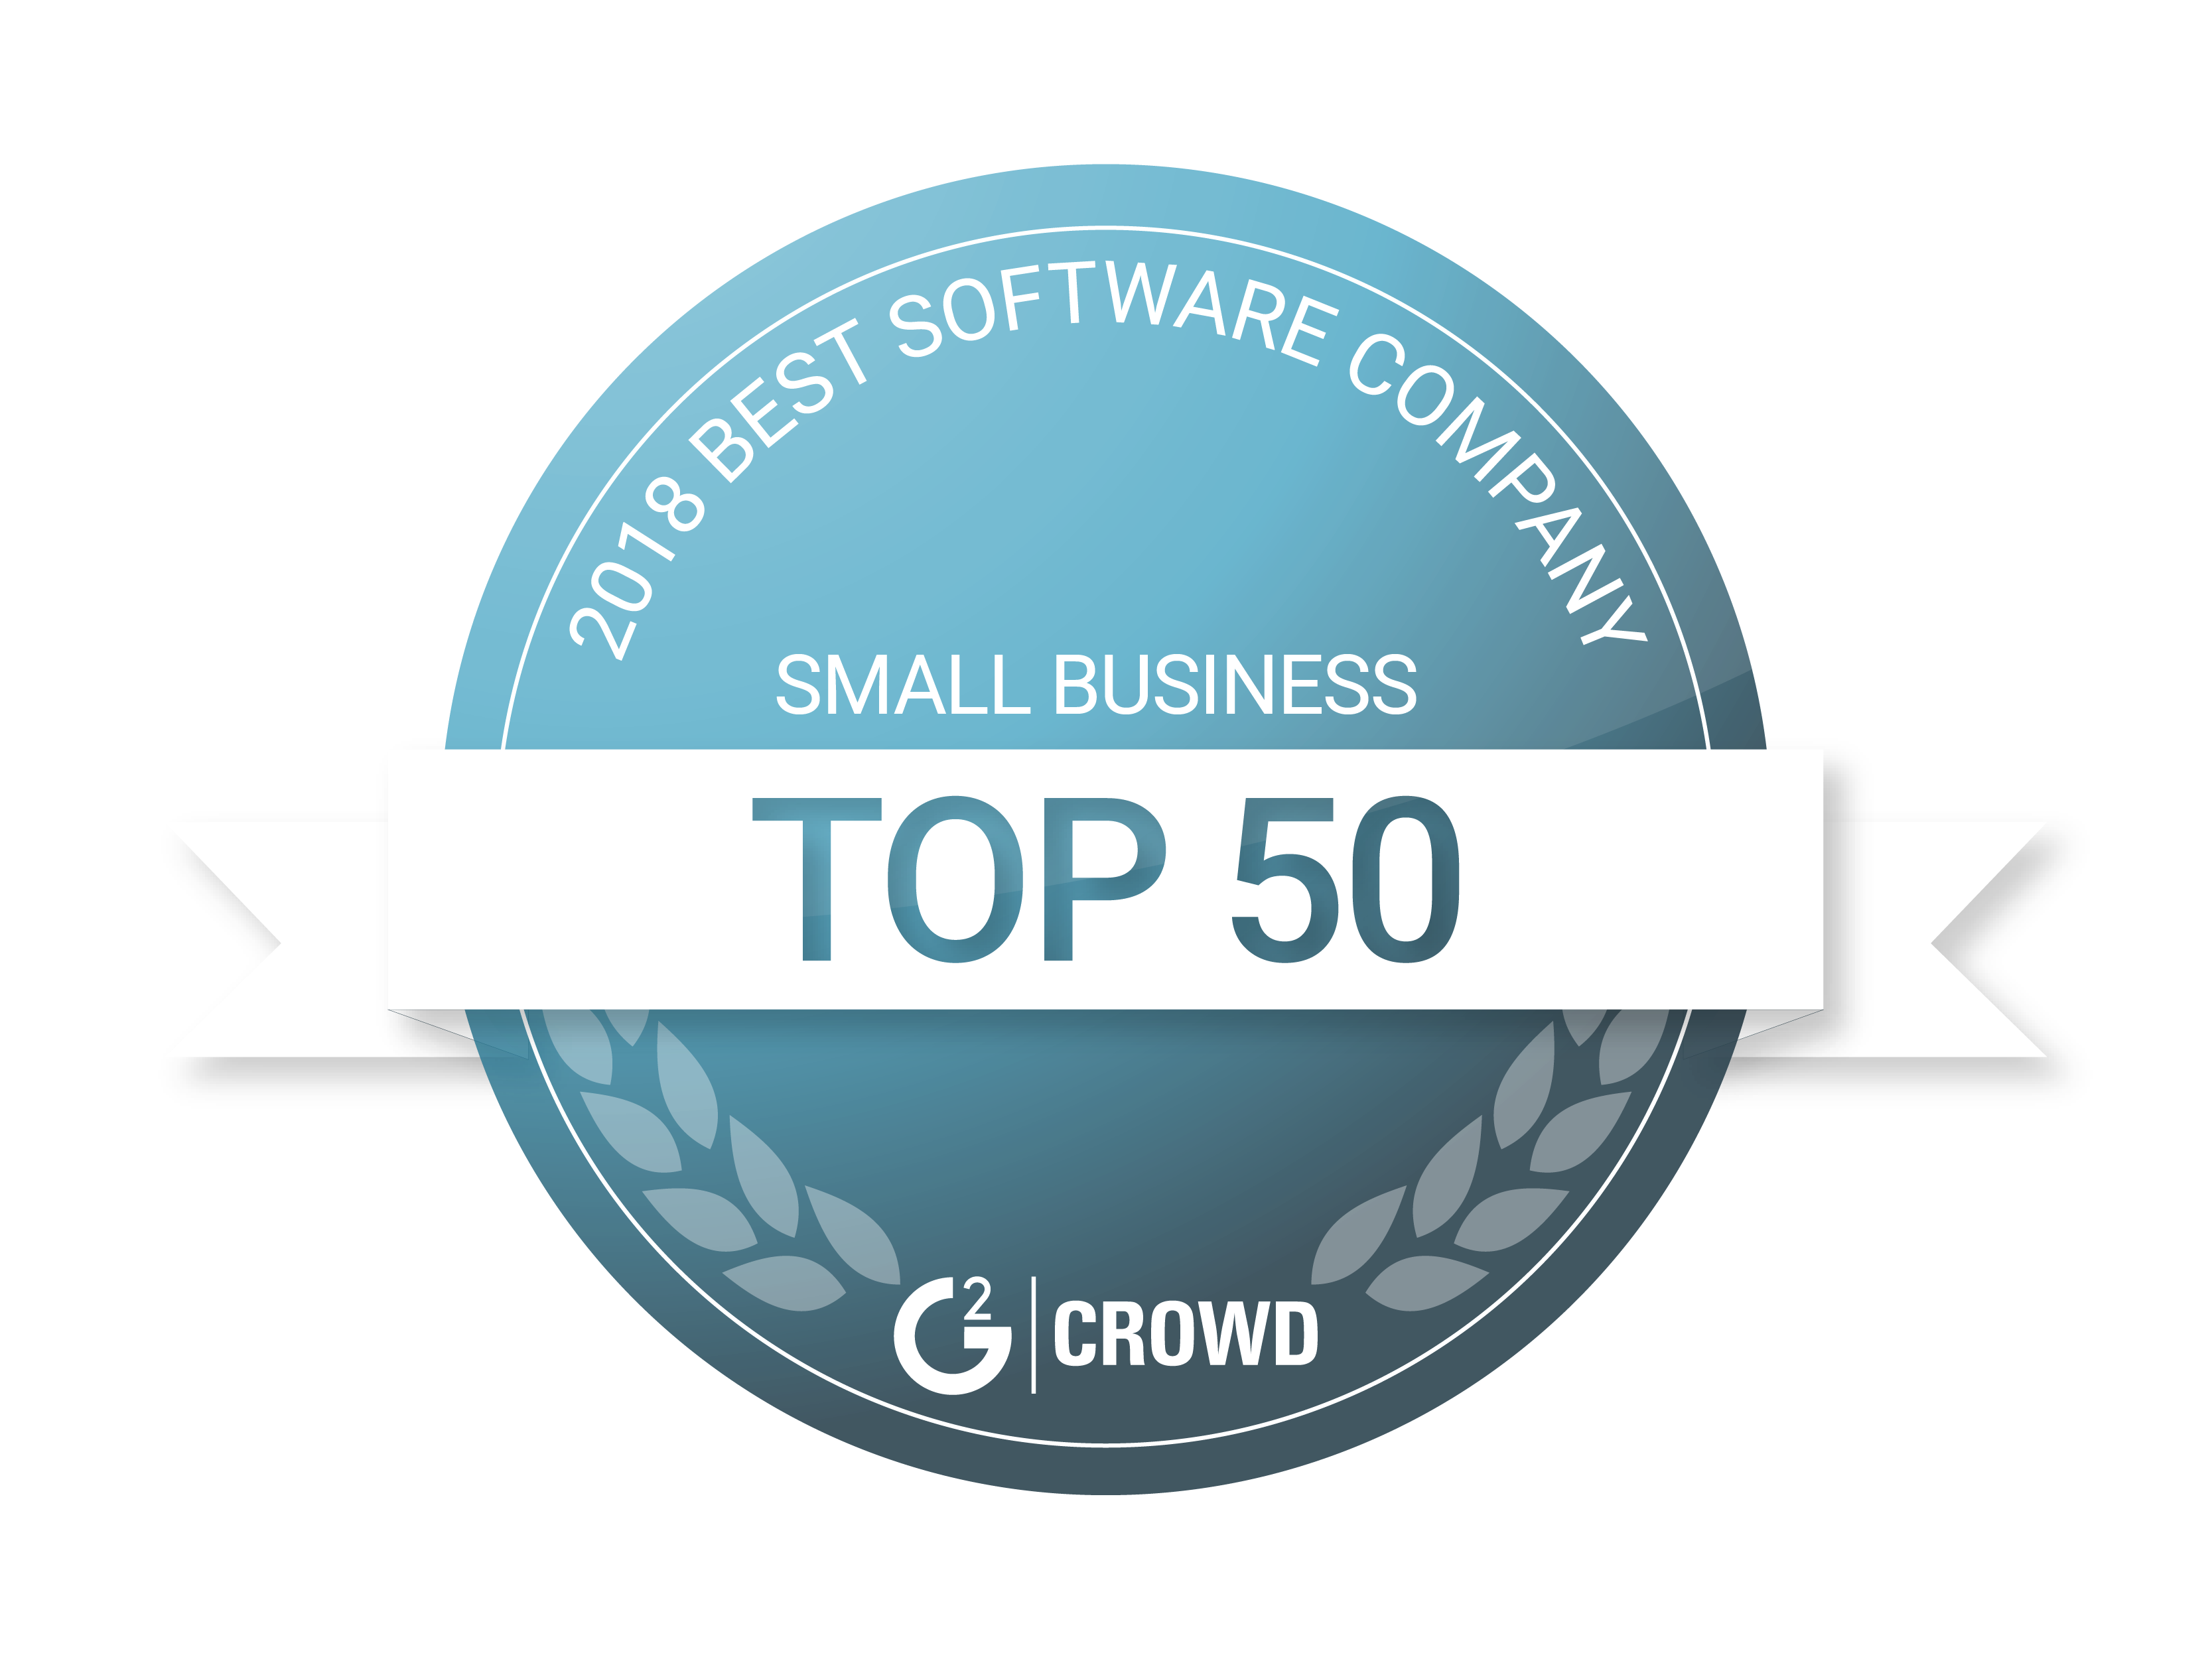 Bonusly Rated No. 2 Among The Top 50 Small-Business Companies Nationwide, According To G2 Crowd